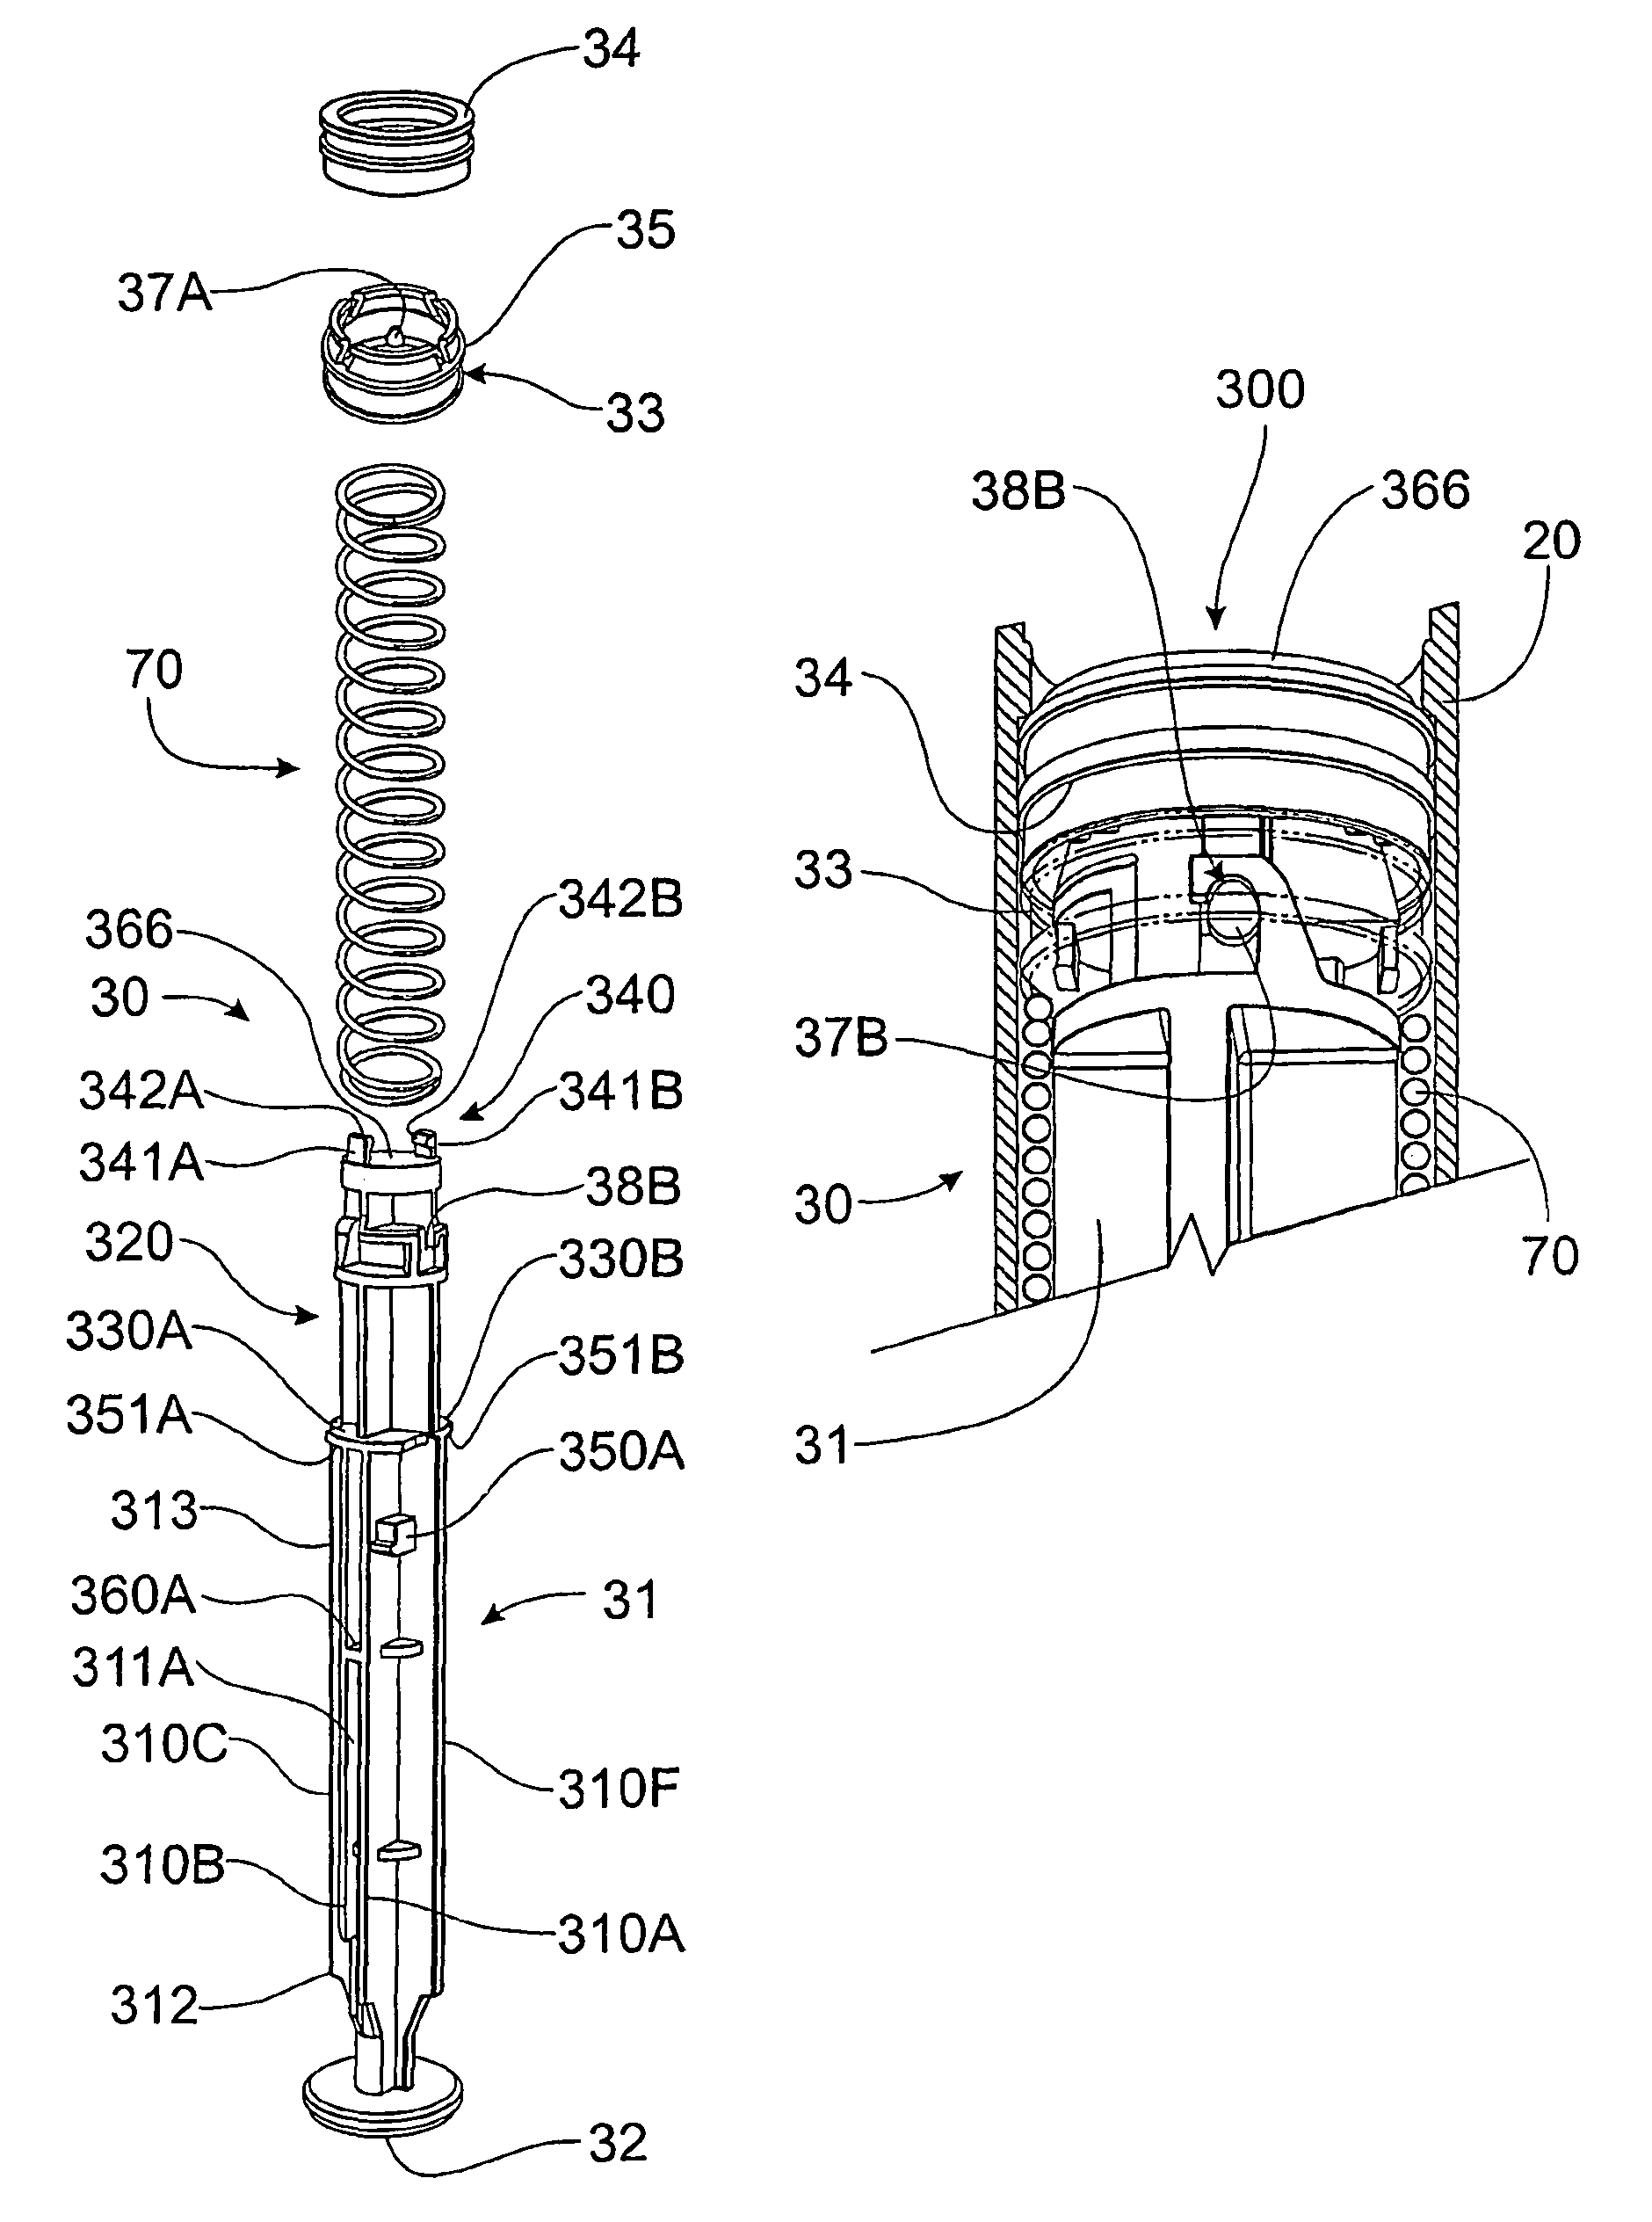 Retractable syringe with plunger disabling system